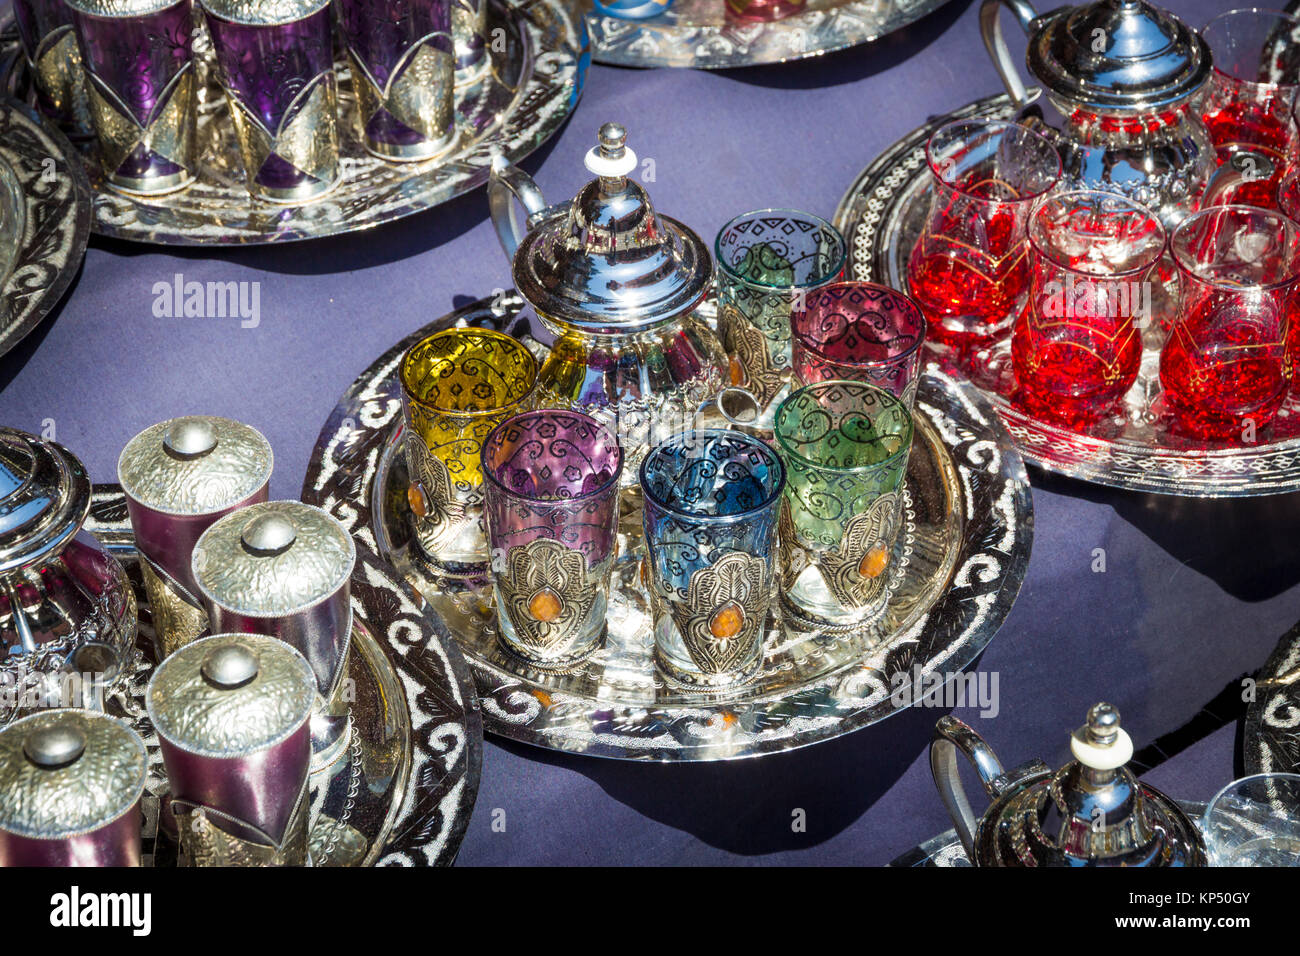 Traditional tea pots with tea glasses on a tray sold in the souks of Marrakesh, Morocco Stock Photo